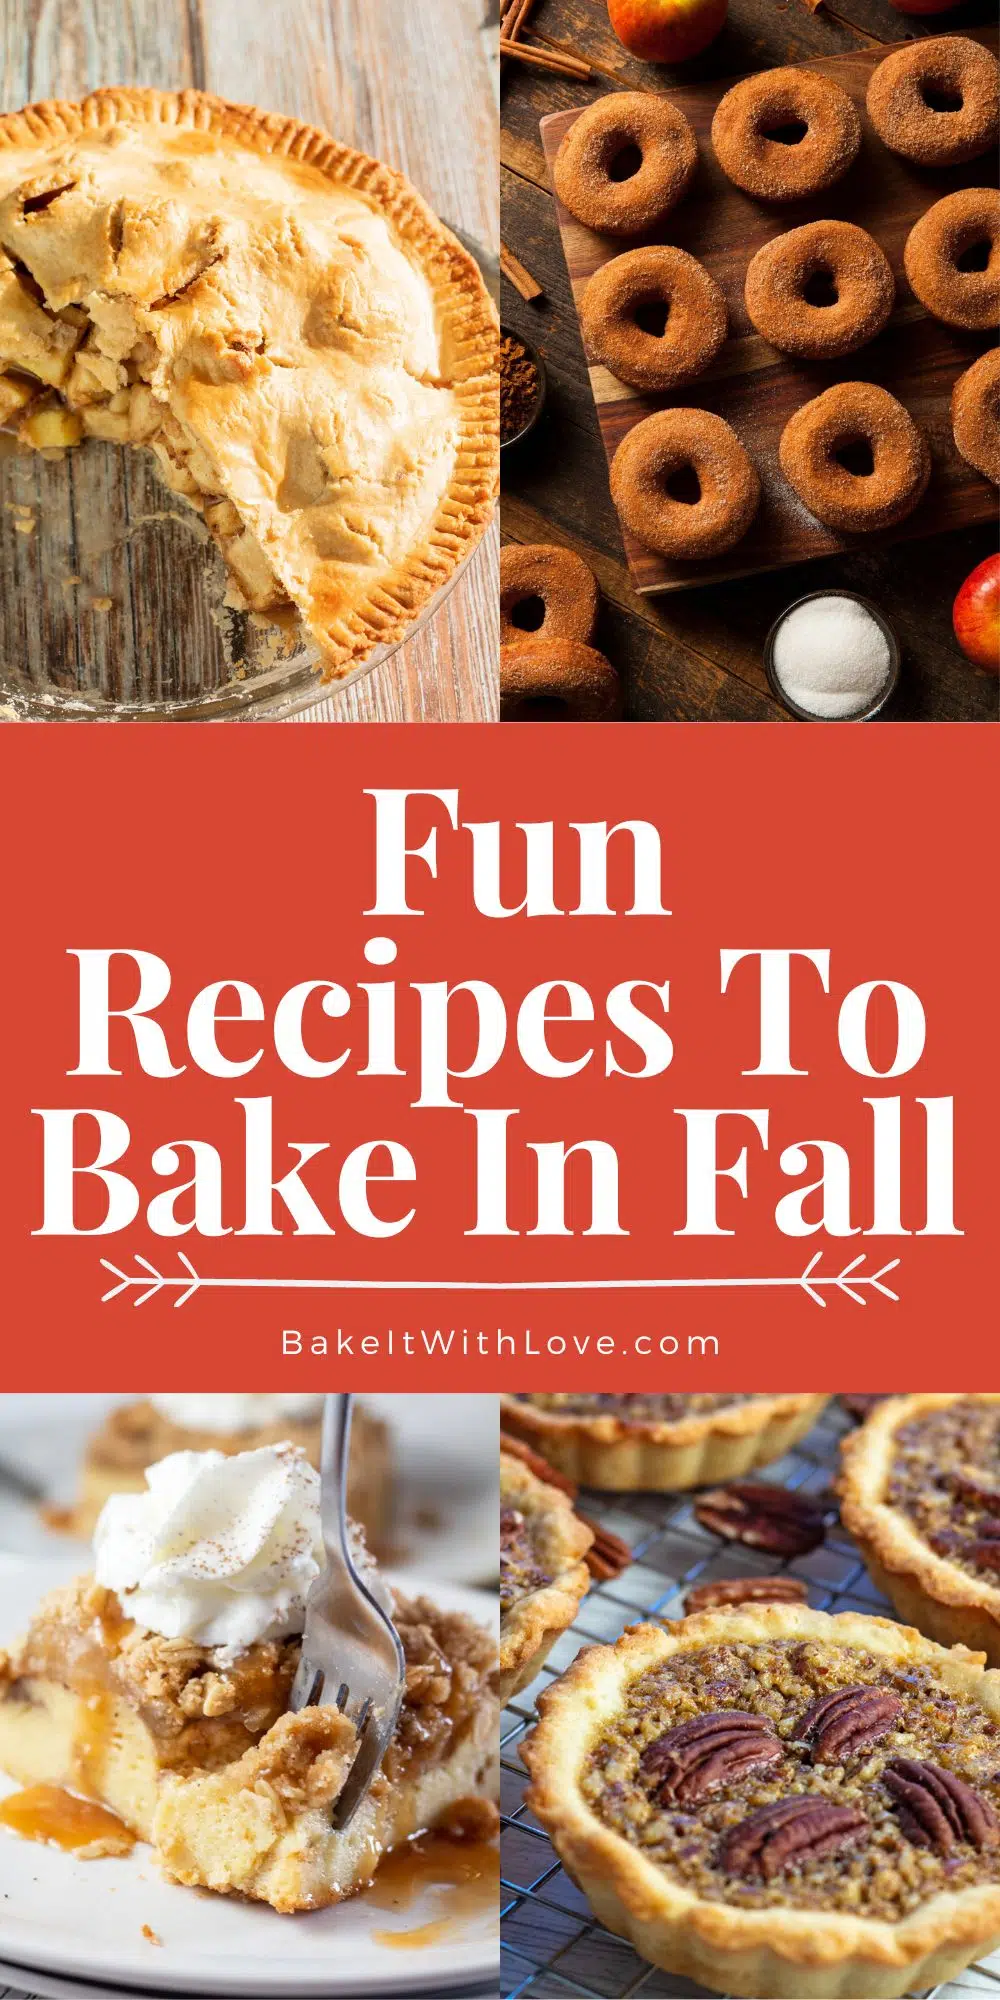 Pin collage image with text showing fall recipes.